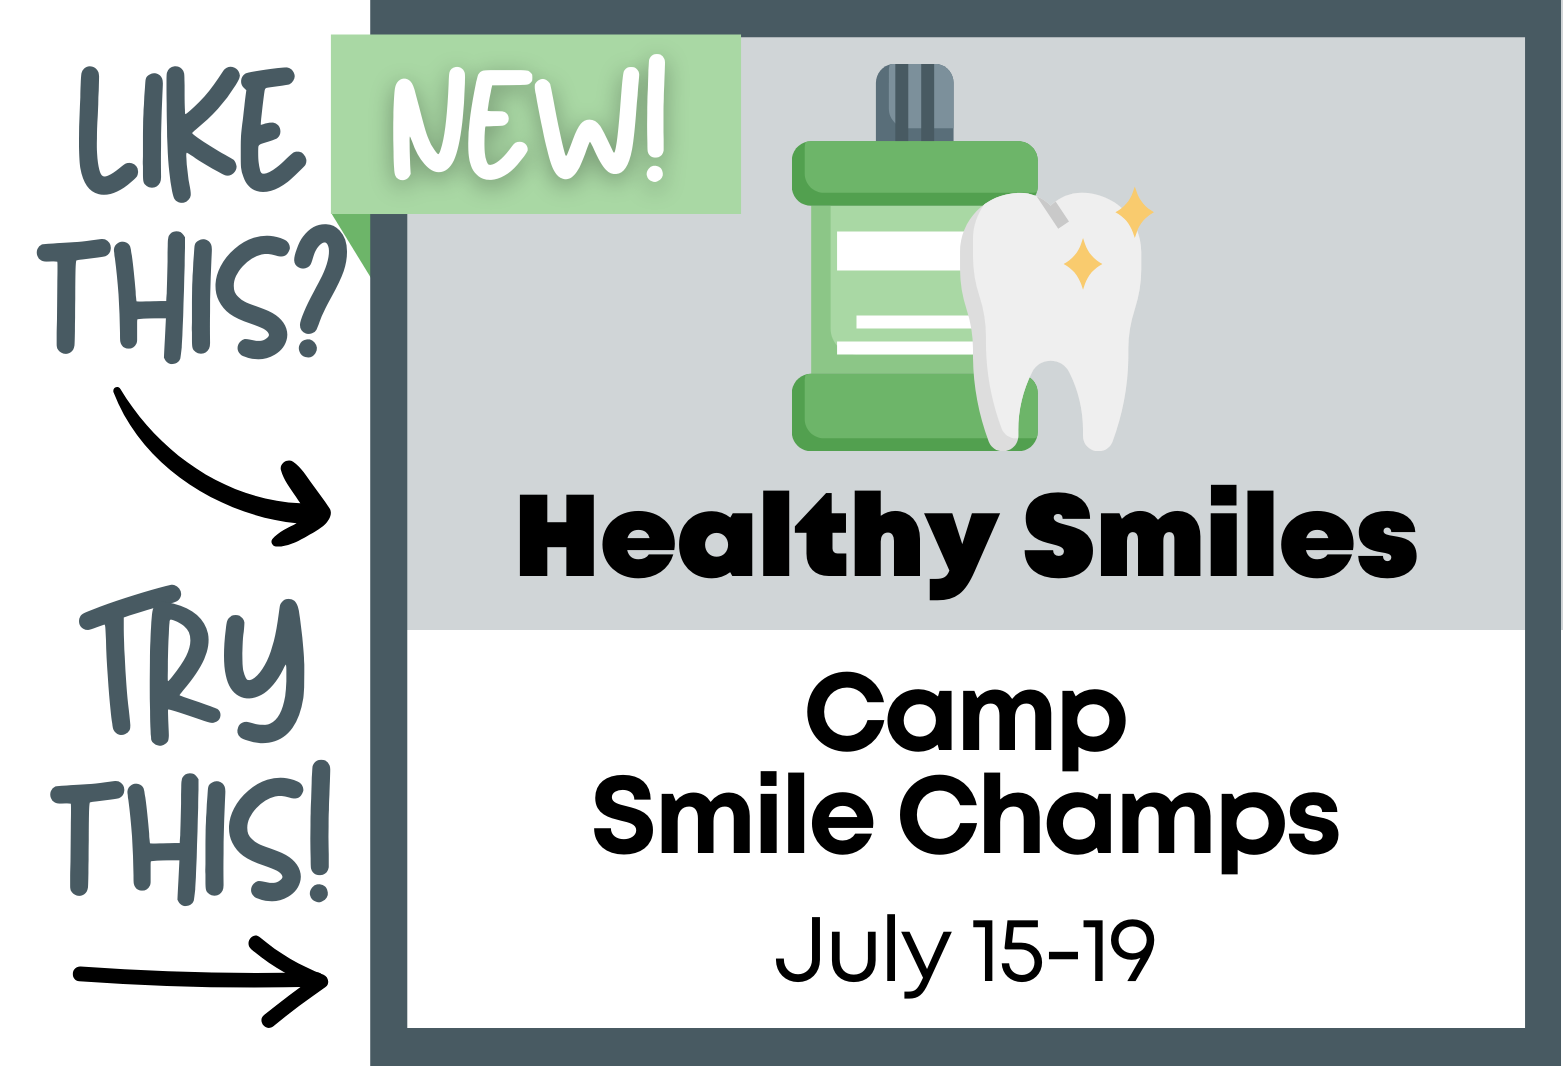 Camp Smile Champs